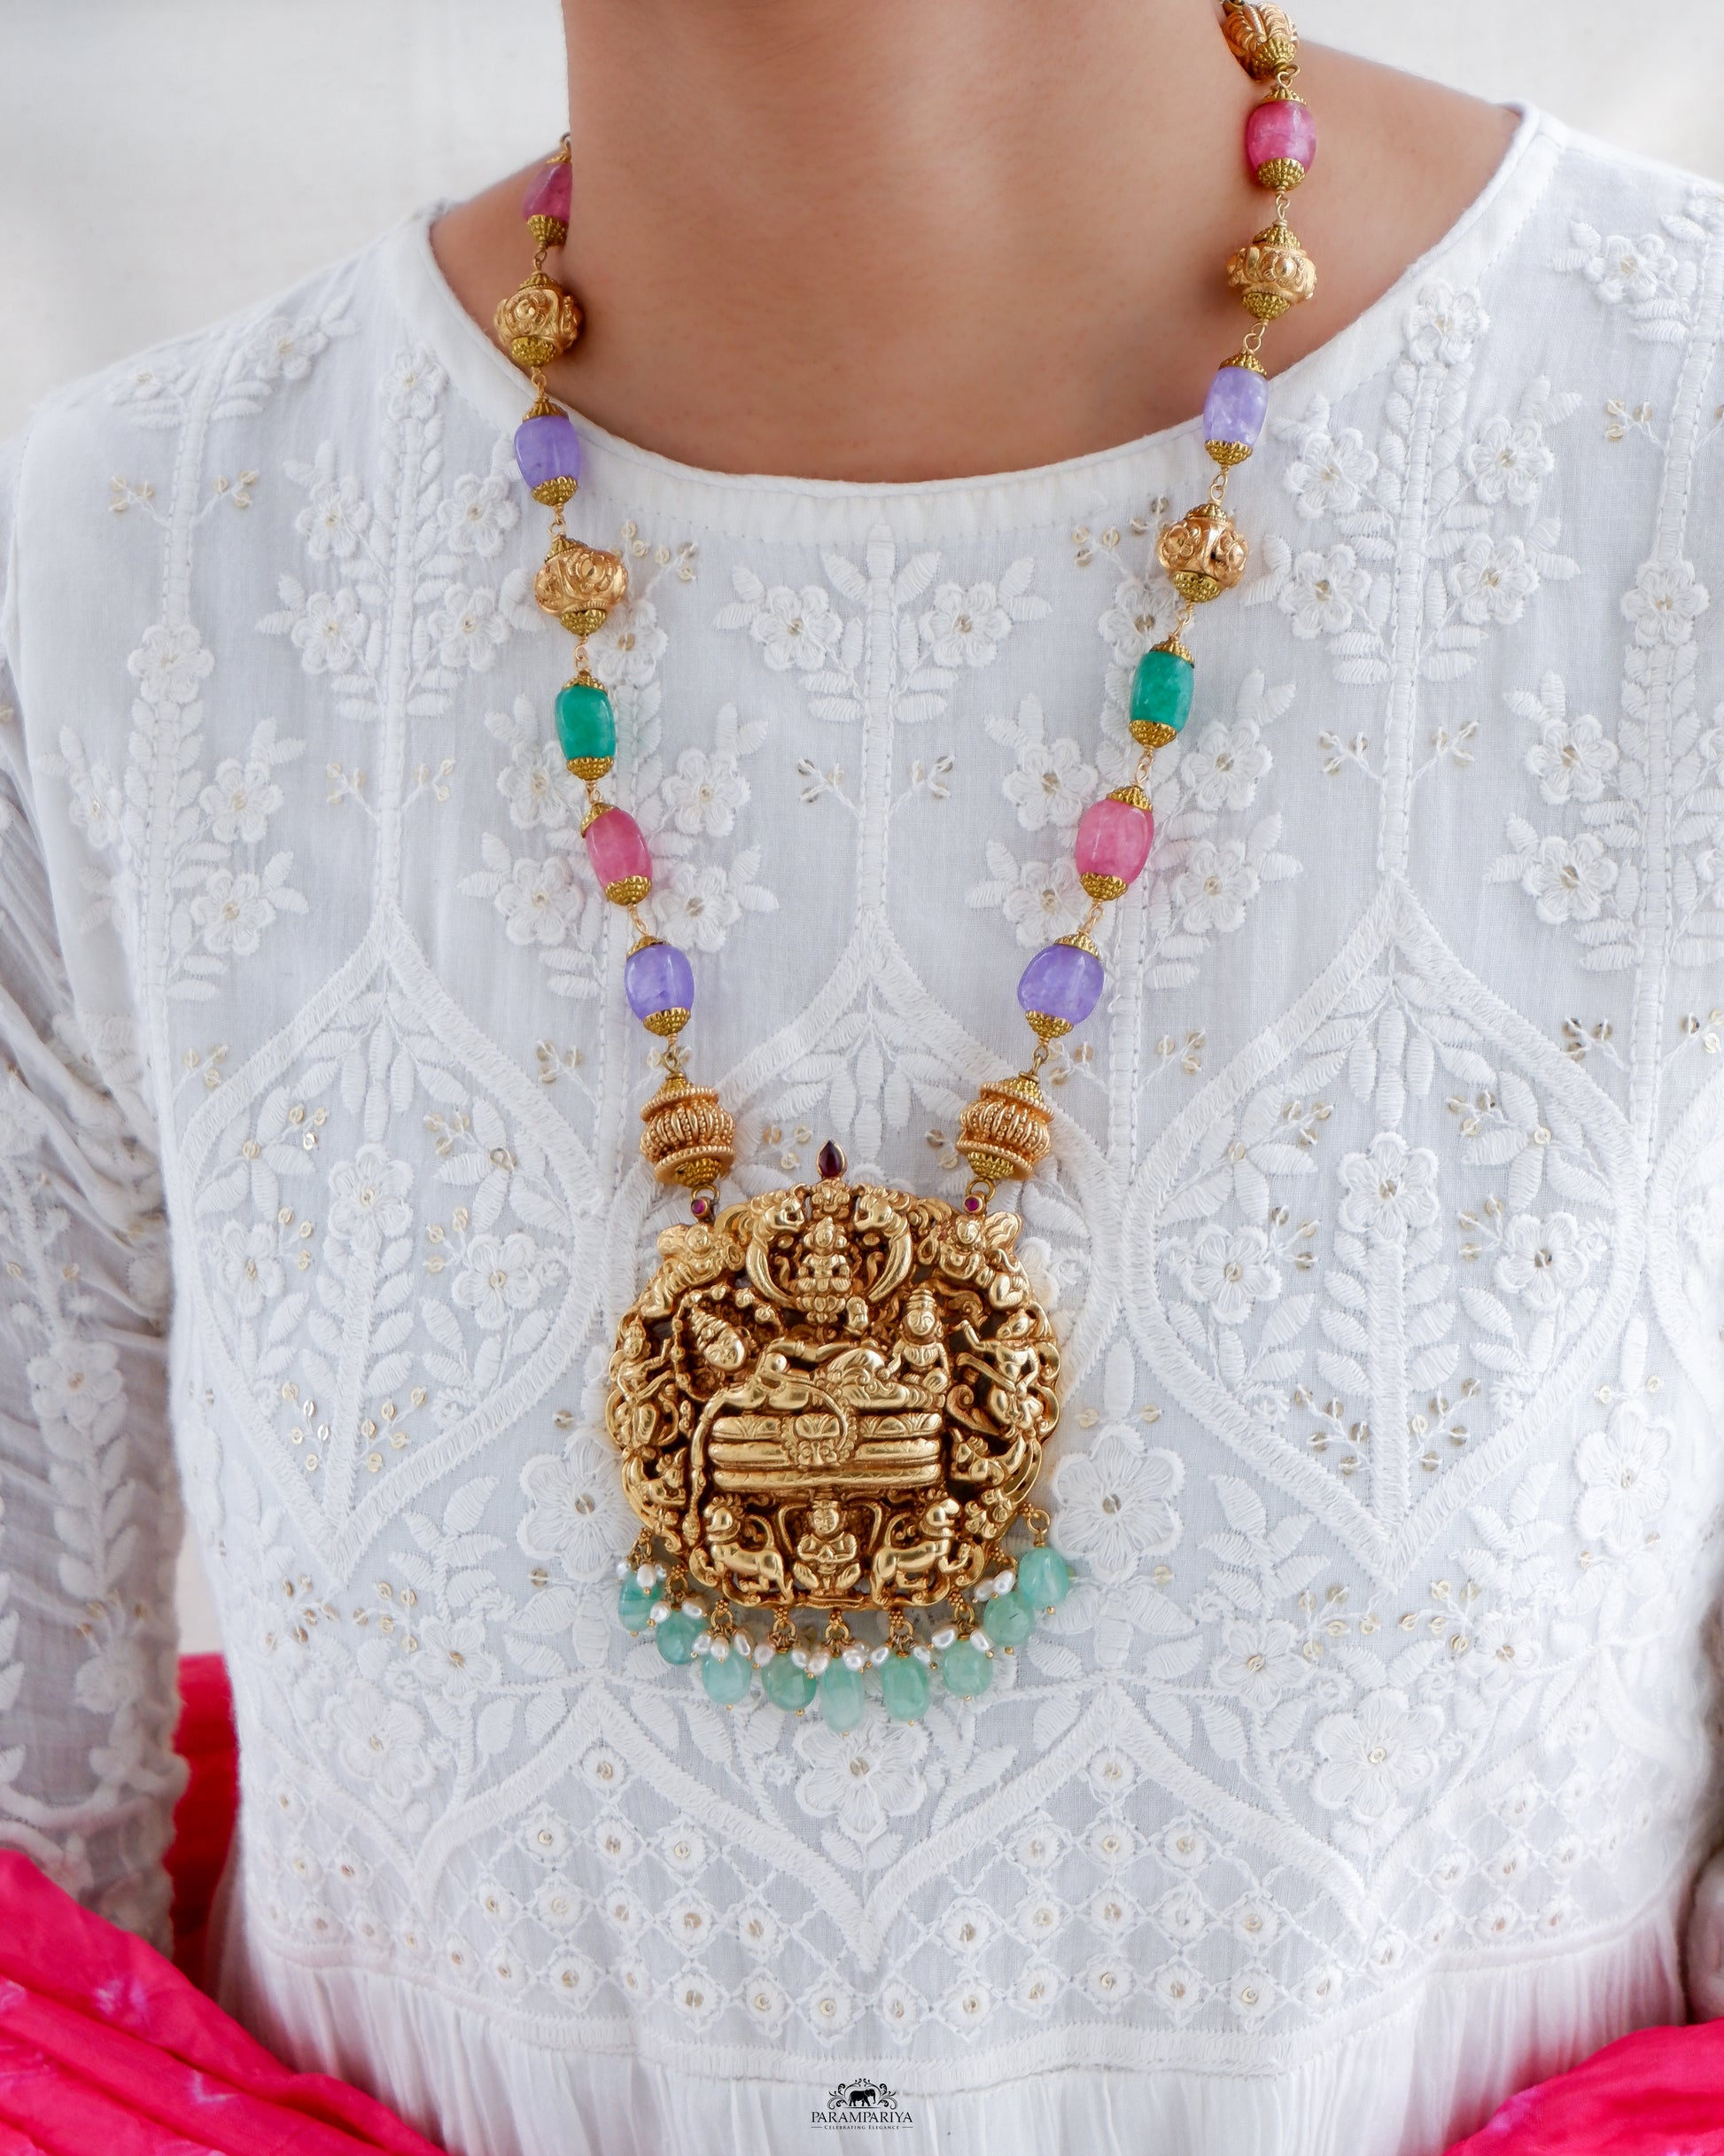 This Vish Necklace is expertly crafted from 92.5 pure silver with antique gold micron plating and adorned with semi-precious beads. It features intricately carved depictions of Lord Vishnu and Goddess Lakshmi, making it a bold statement piece.